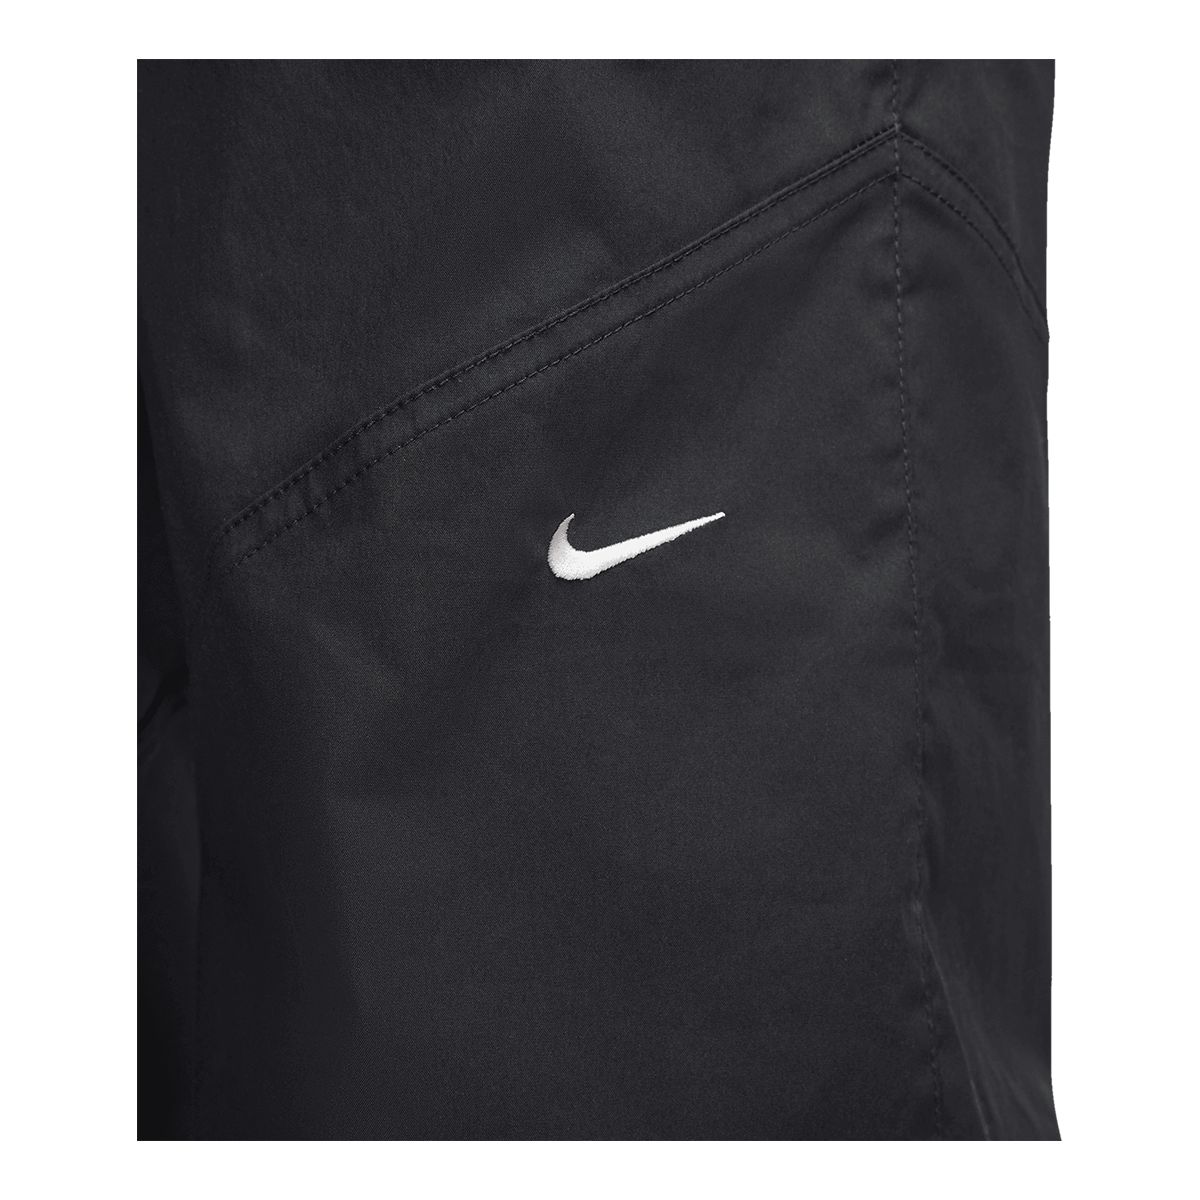 Nike Women's NSW Everyday Mod High Rise Wide Pants